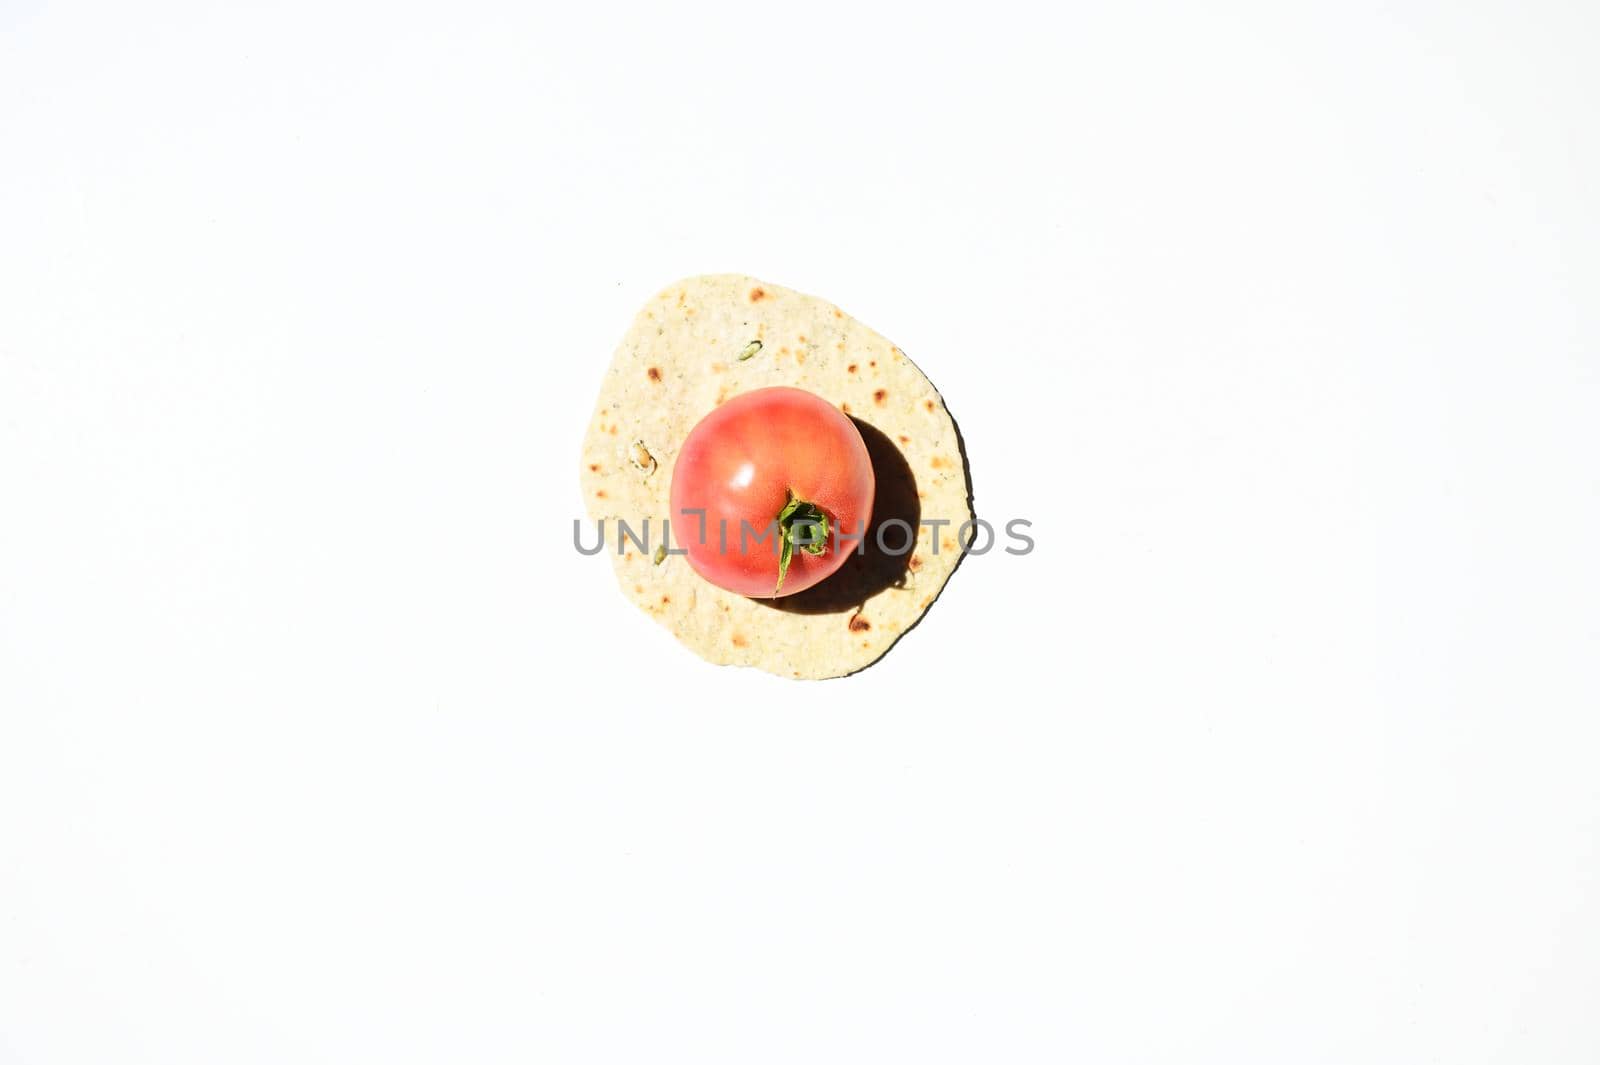 Flat lay of a ripe juicy tomato on a freshly baked homemade chapati, pita bread, flatbread, isolated over white background with copy space for advertising text. Top view, still life, food background